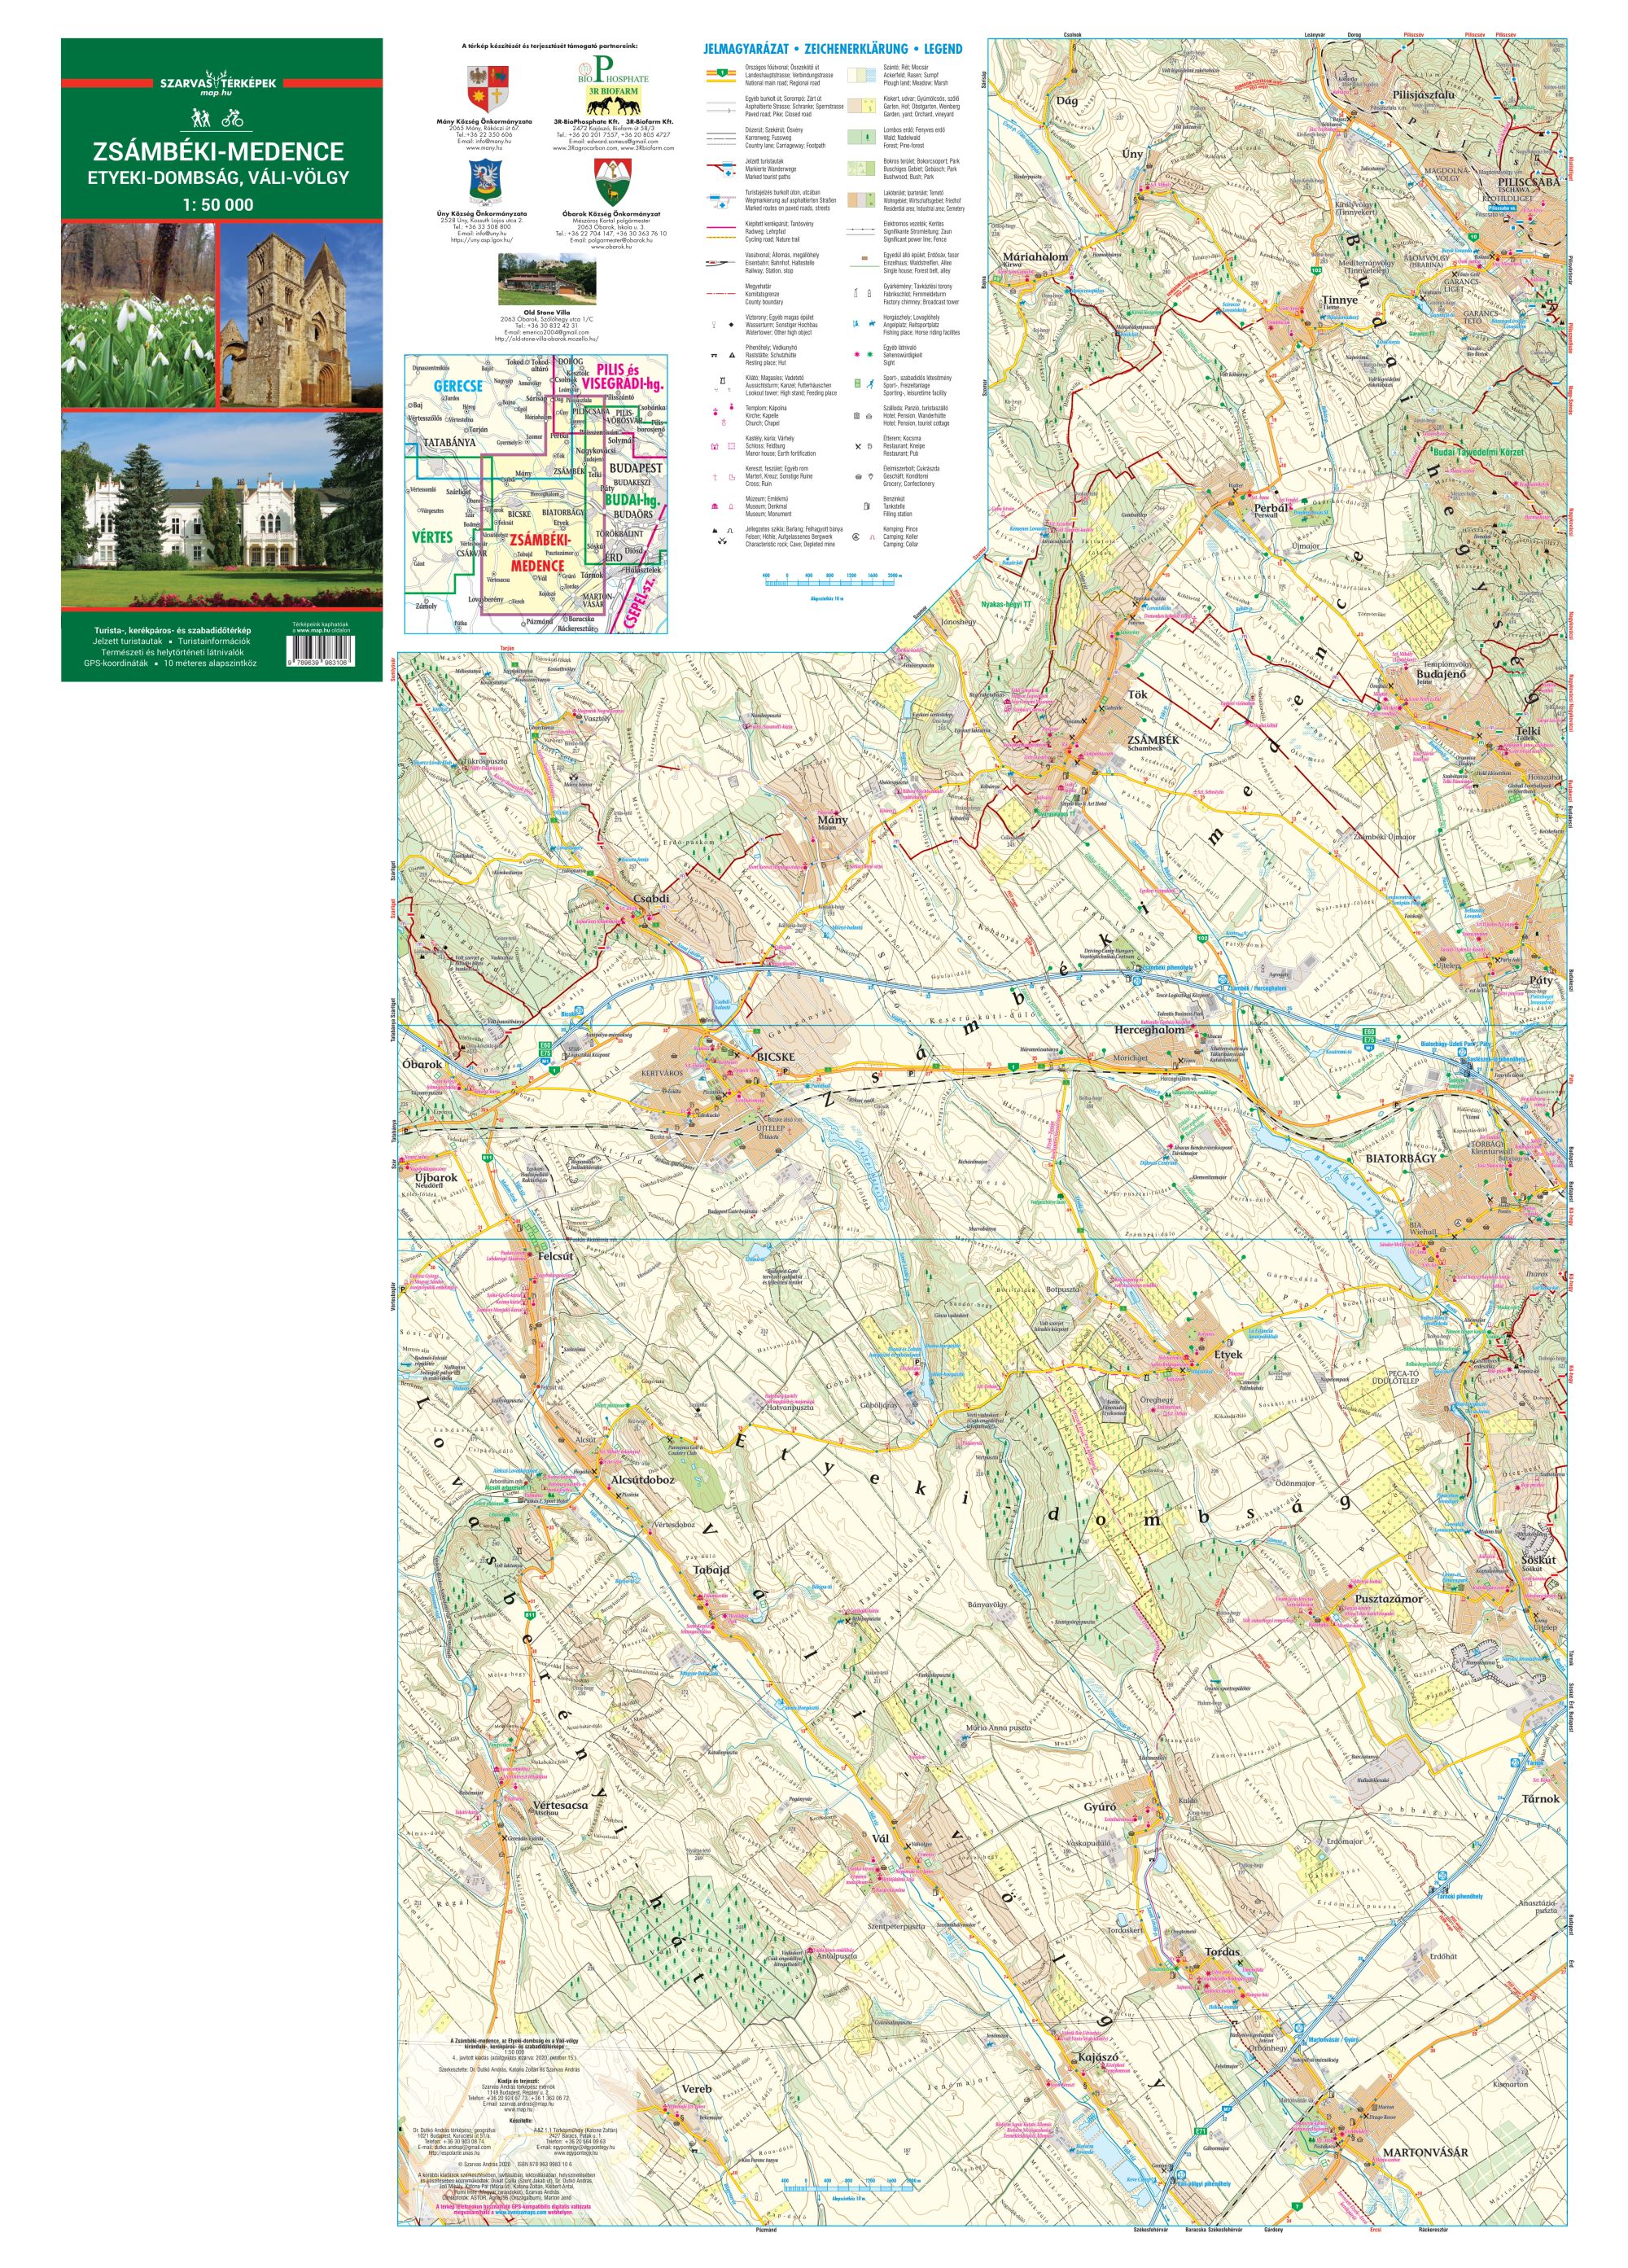 Tourist-biking map for mobile devices and tablets